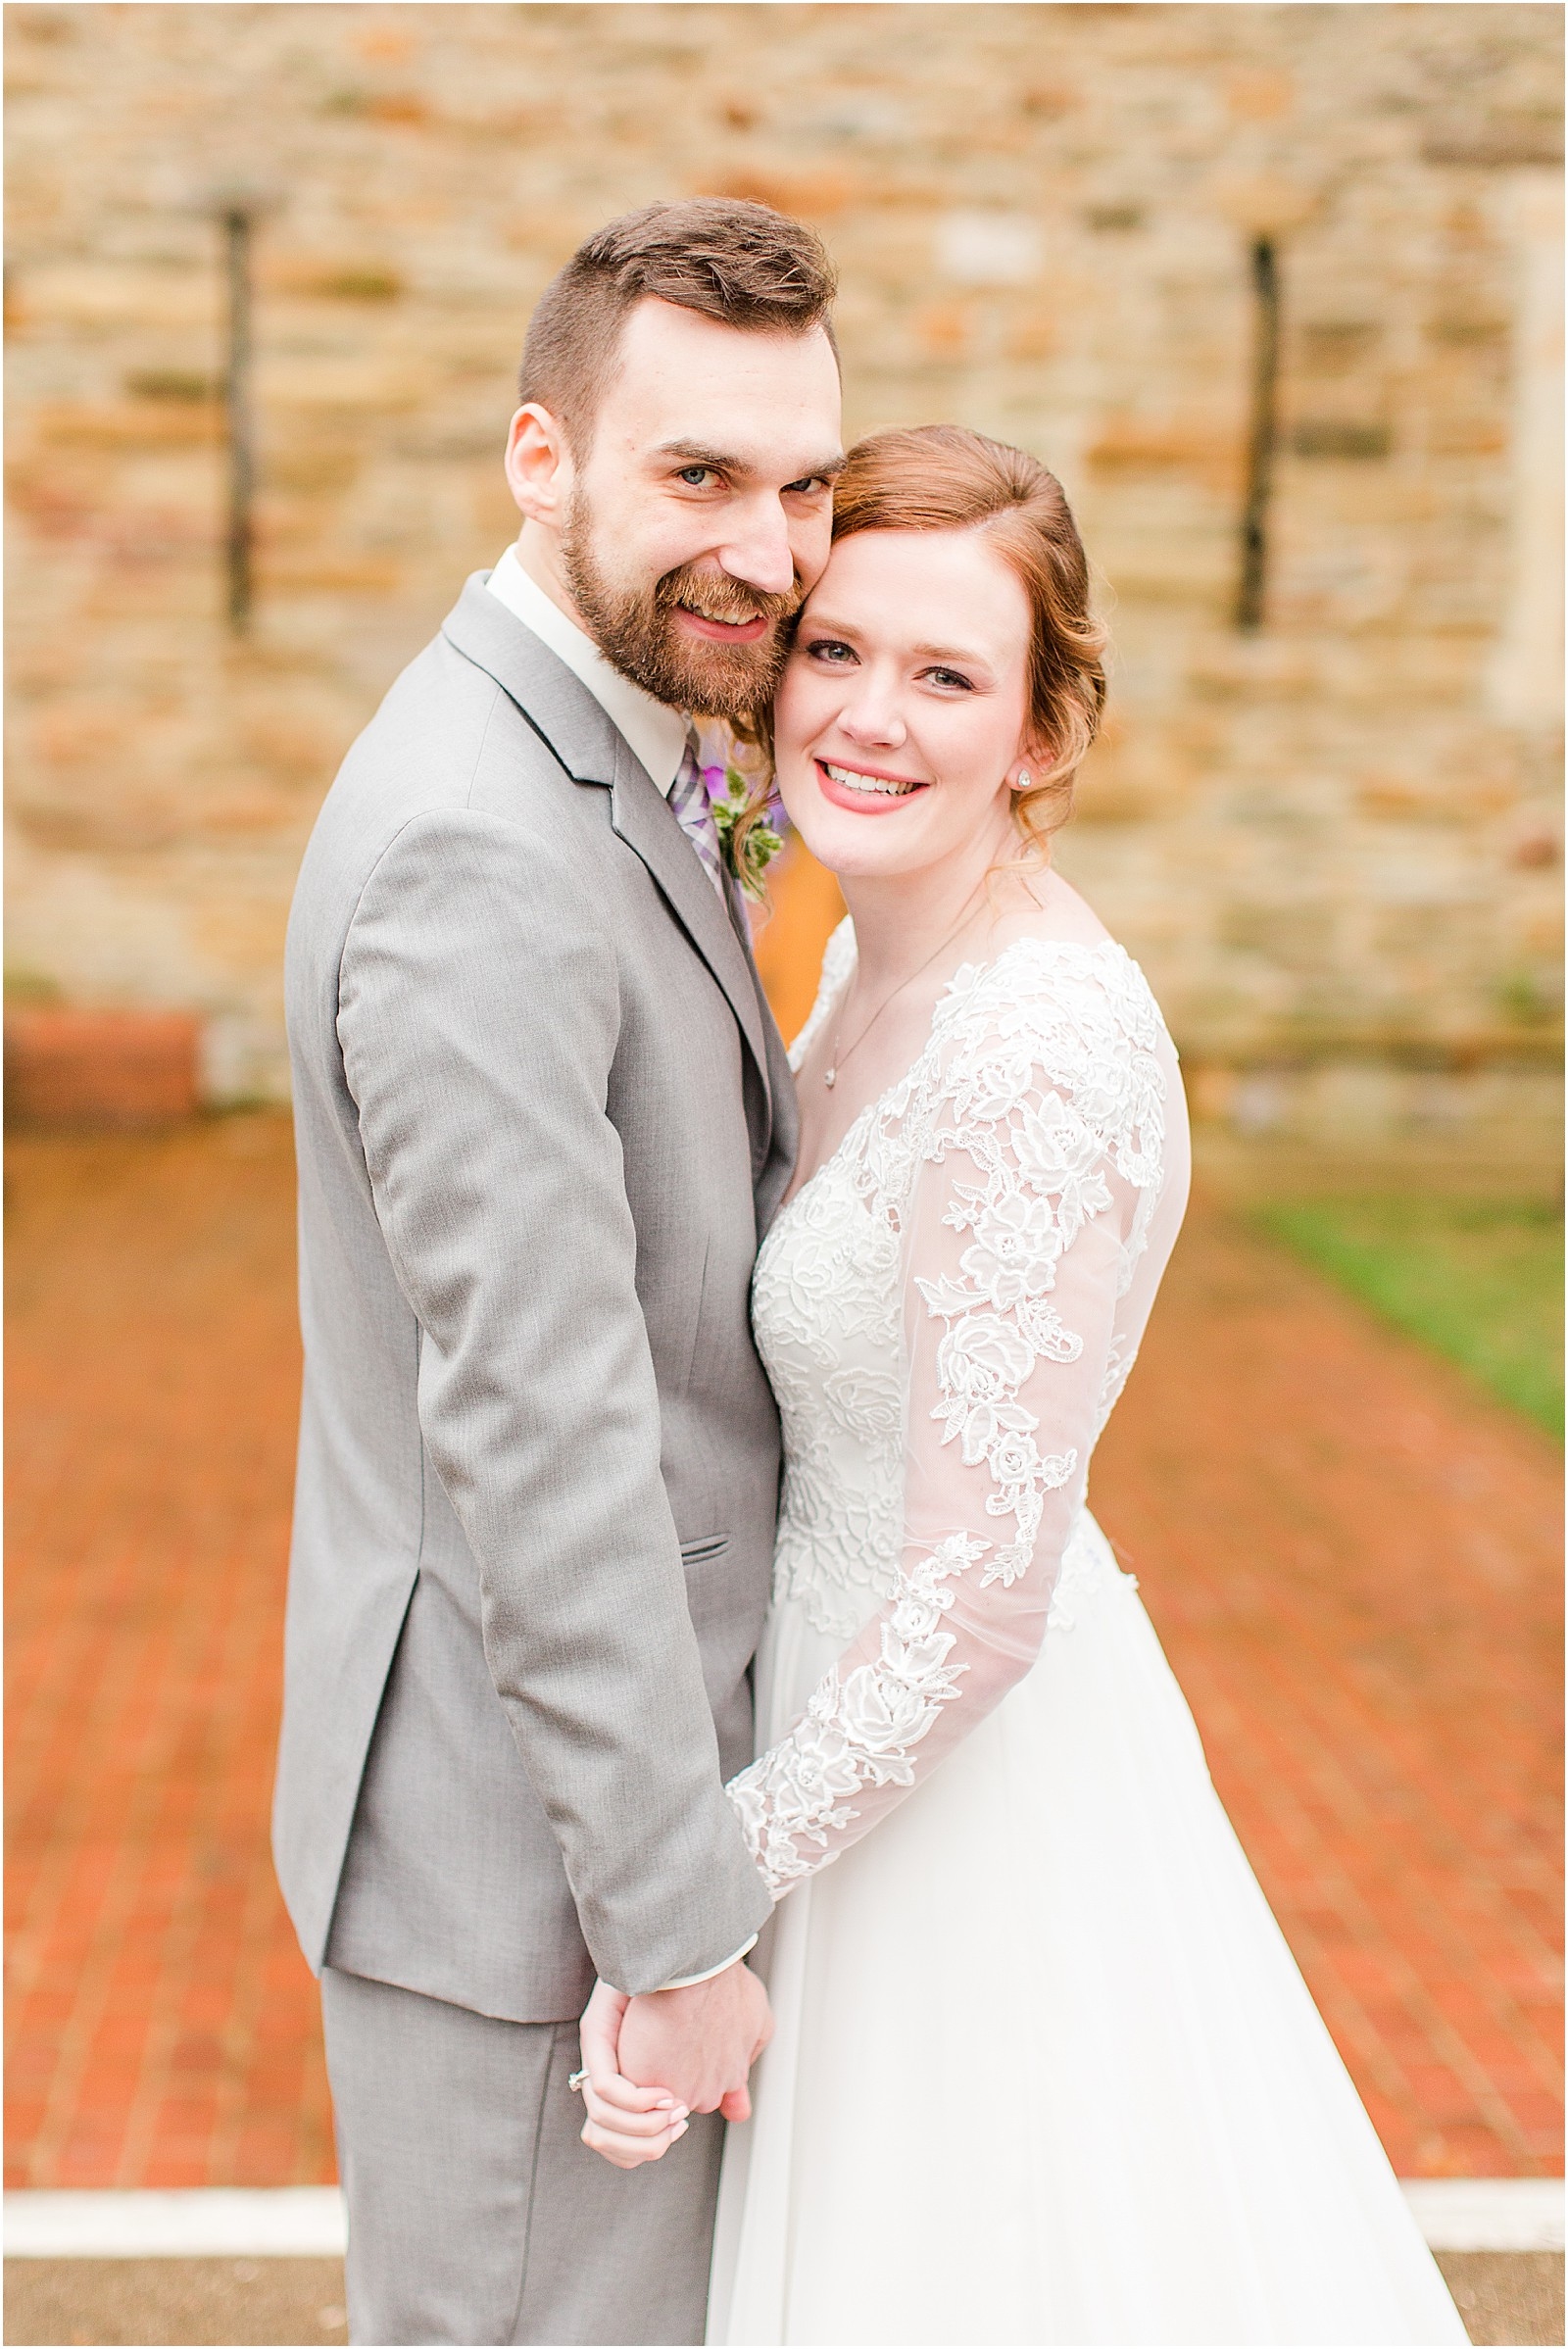 Amy and Logan | A Rainy New Harmony Indiana wedding | Bret and BRandie Photography | Bret and Brandie Photography | 0044.jpg